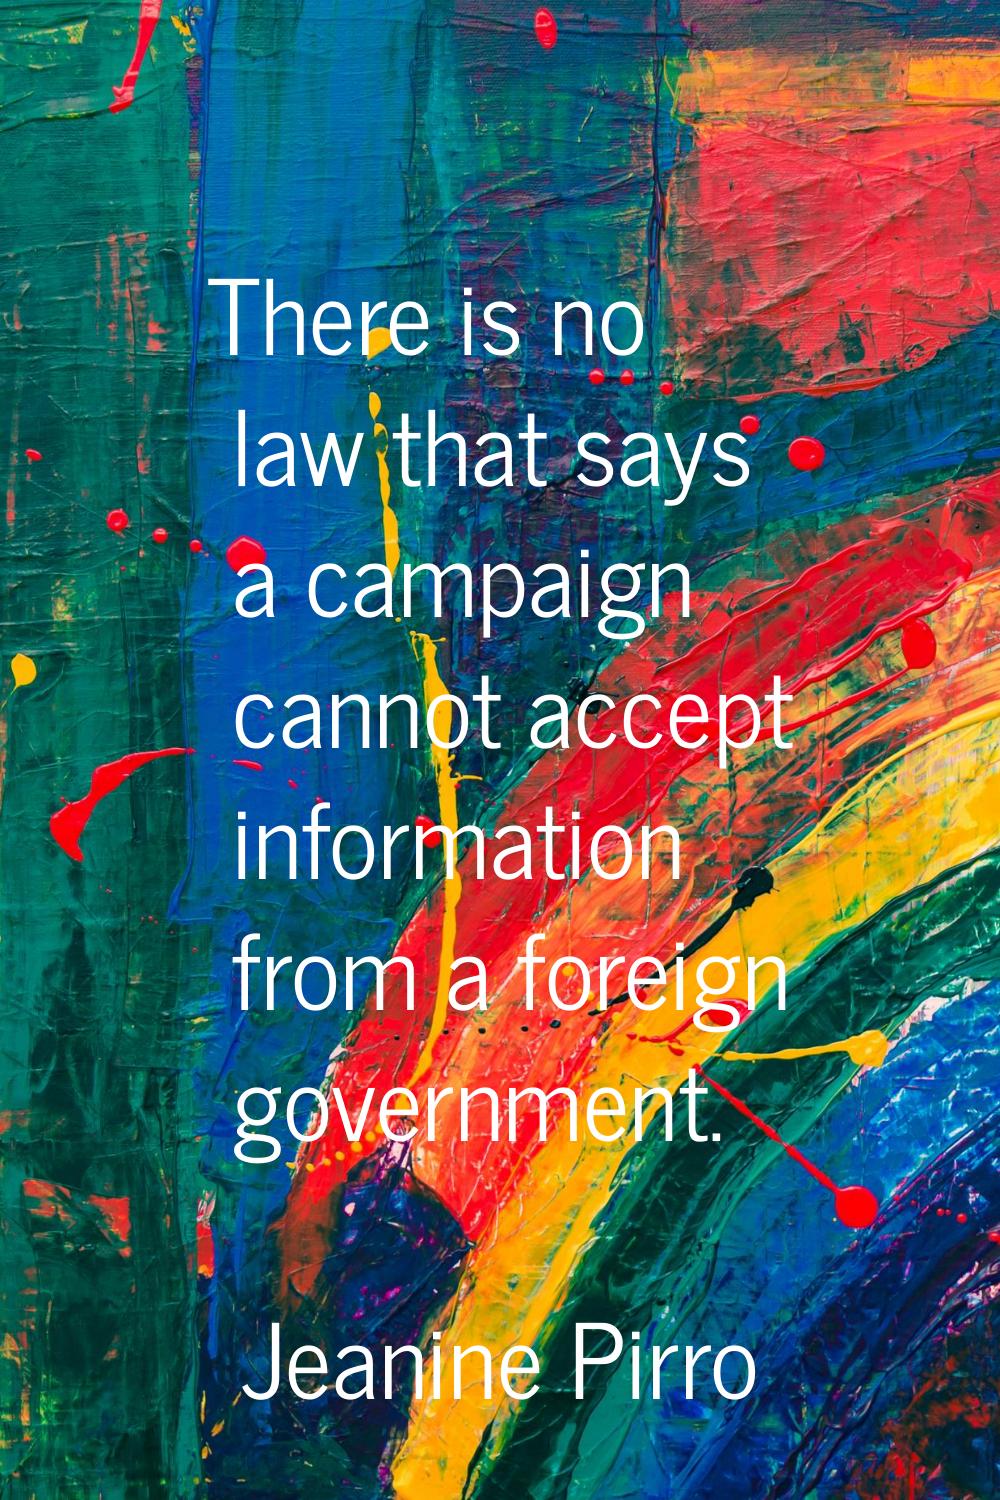 There is no law that says a campaign cannot accept information from a foreign government.